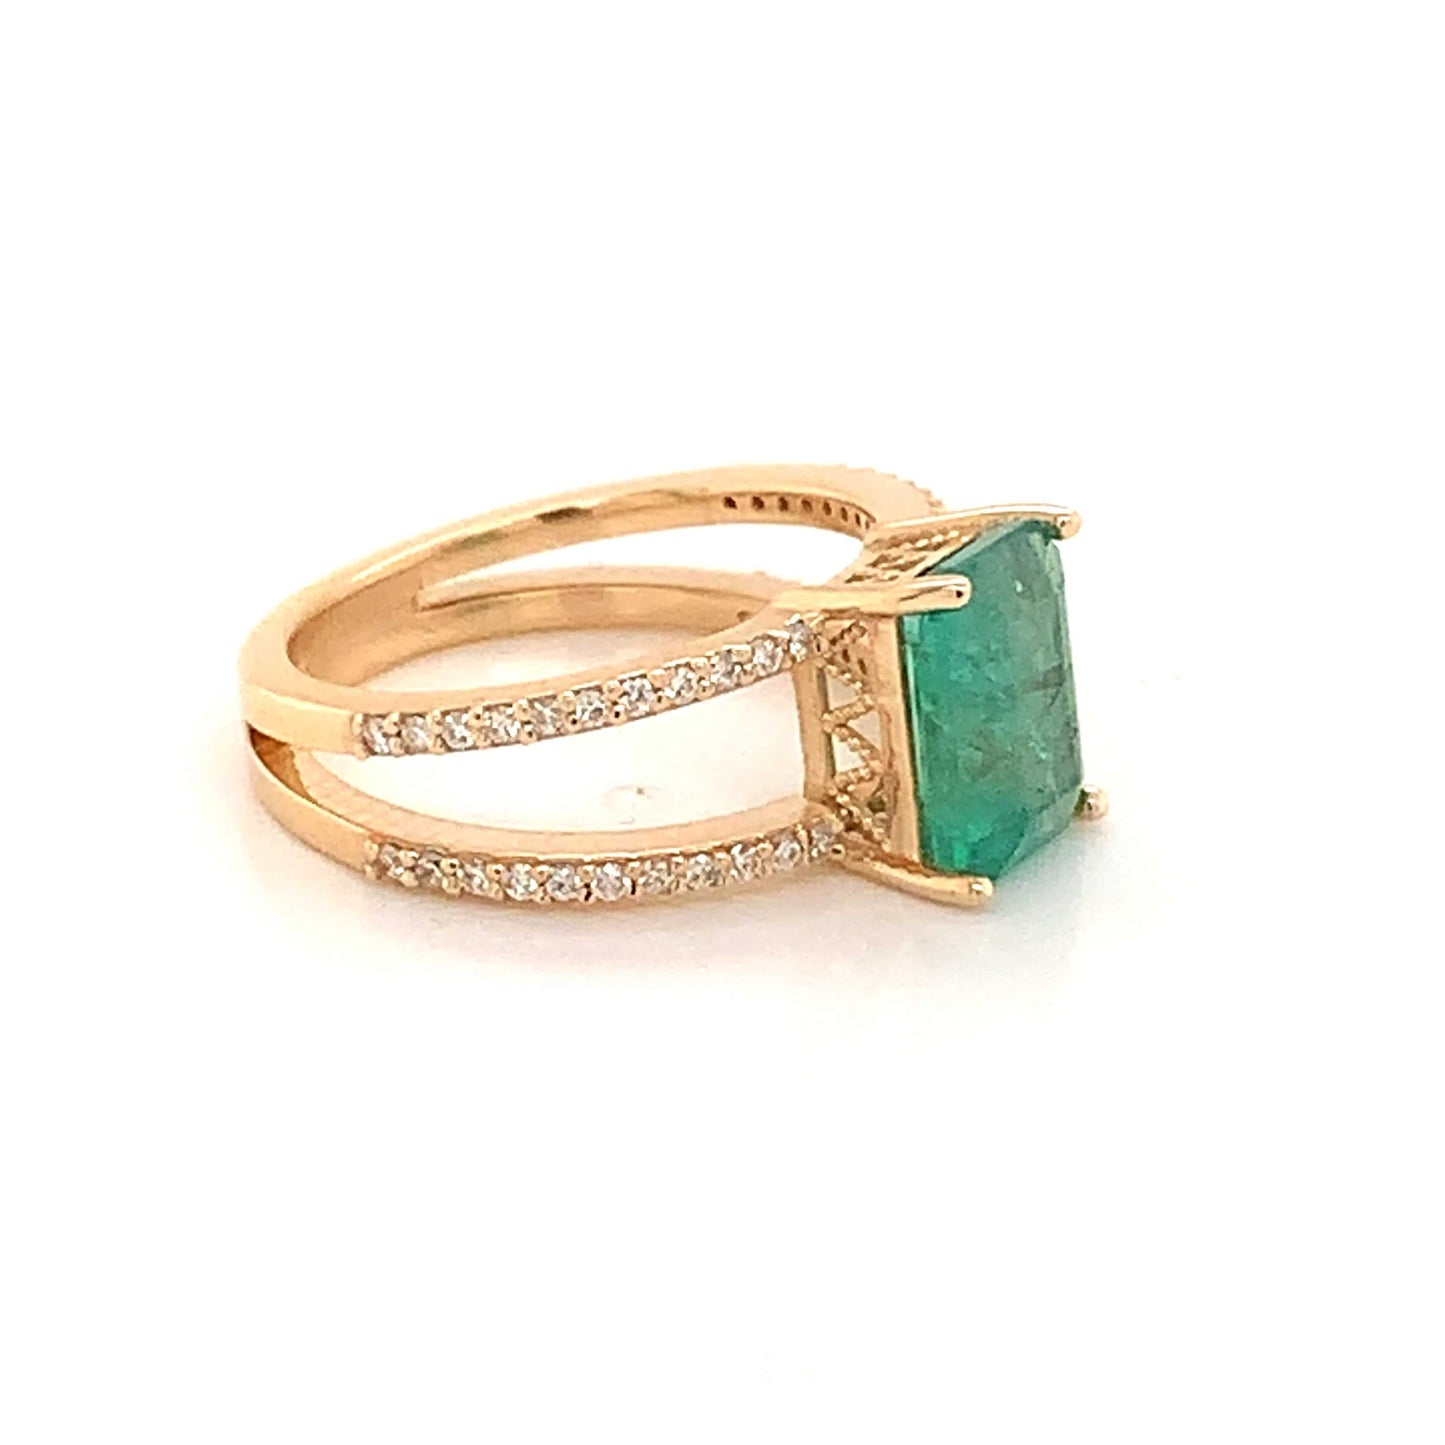 Natural Emerald Diamond Ring 14k Gold 2.32 TCW Size 7 Certified $5,950 111874 - Certified Estate Jewelry